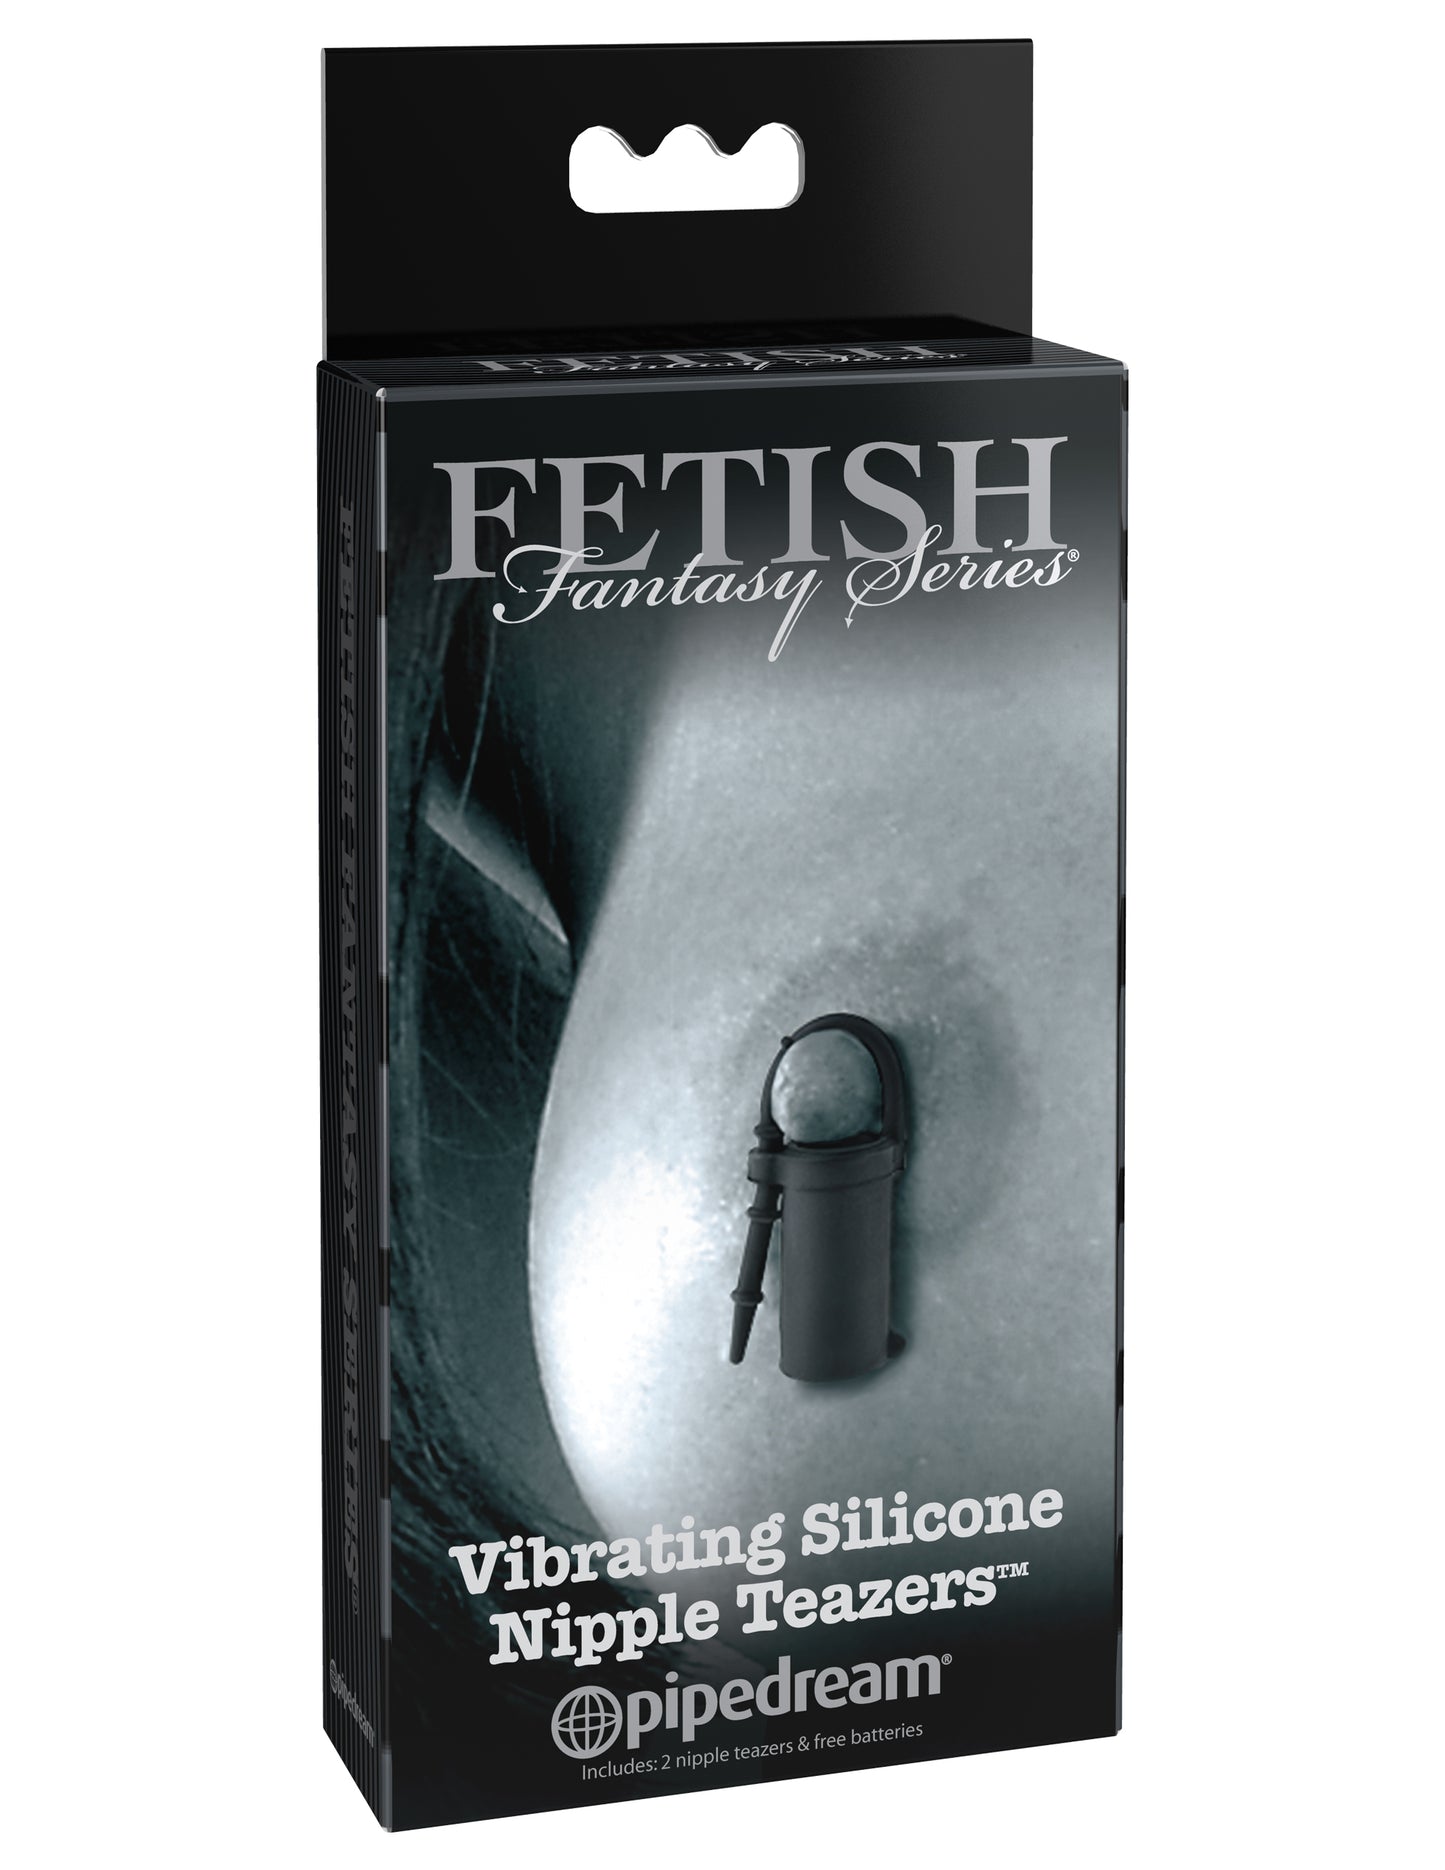 Fetish Fantasy Limited Edition Vibrating Silicone Nipple Teazers PD4461-23